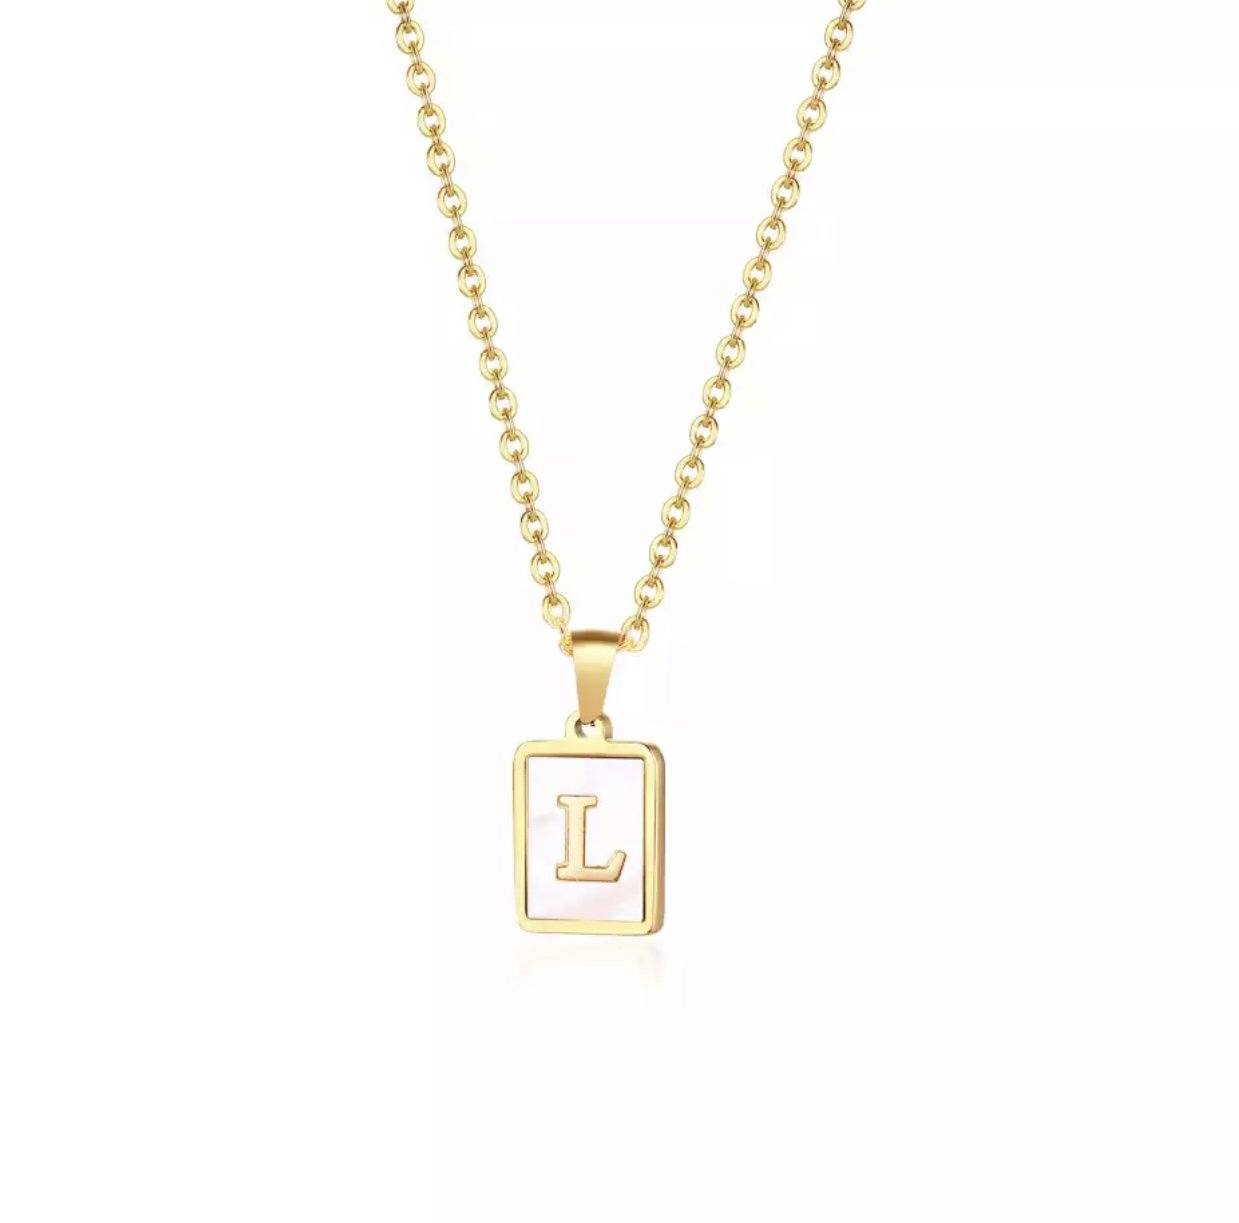 Gold Plated Mother of Pearl Pendant Necklace - Modern Accessory & Gift Idea Bijou Her